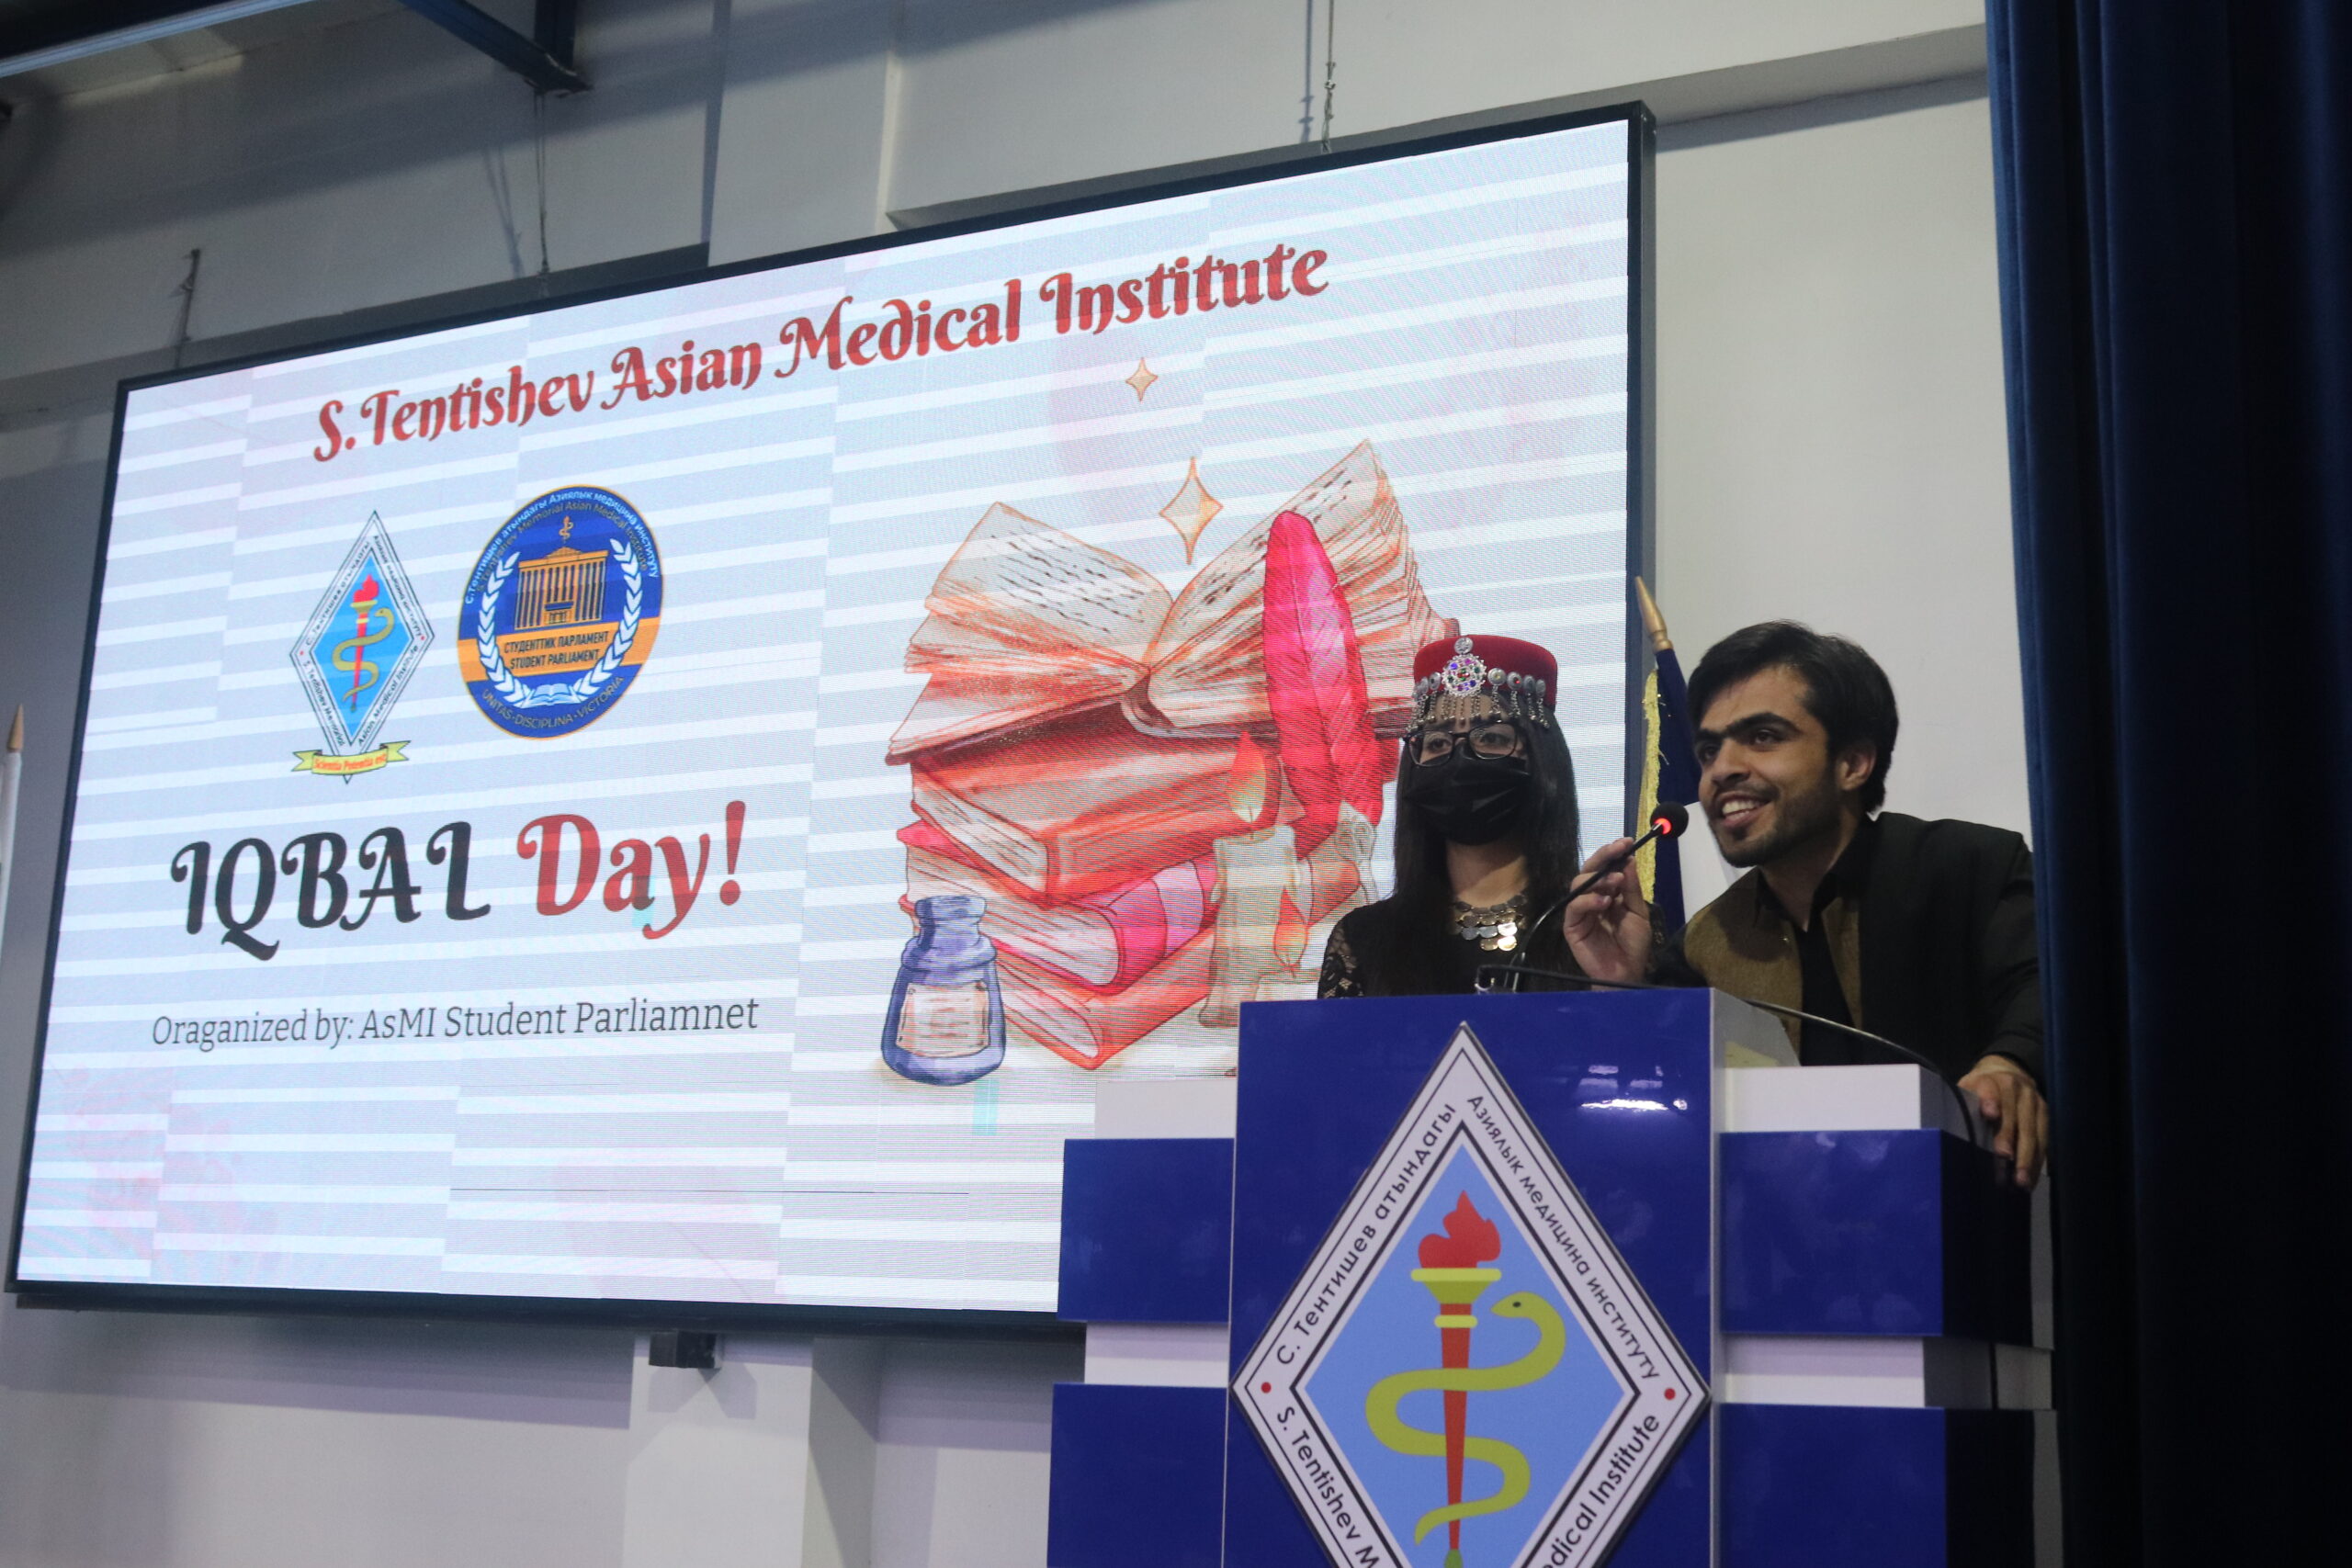 Iqbal Day 2023 at Asian Medical Institute